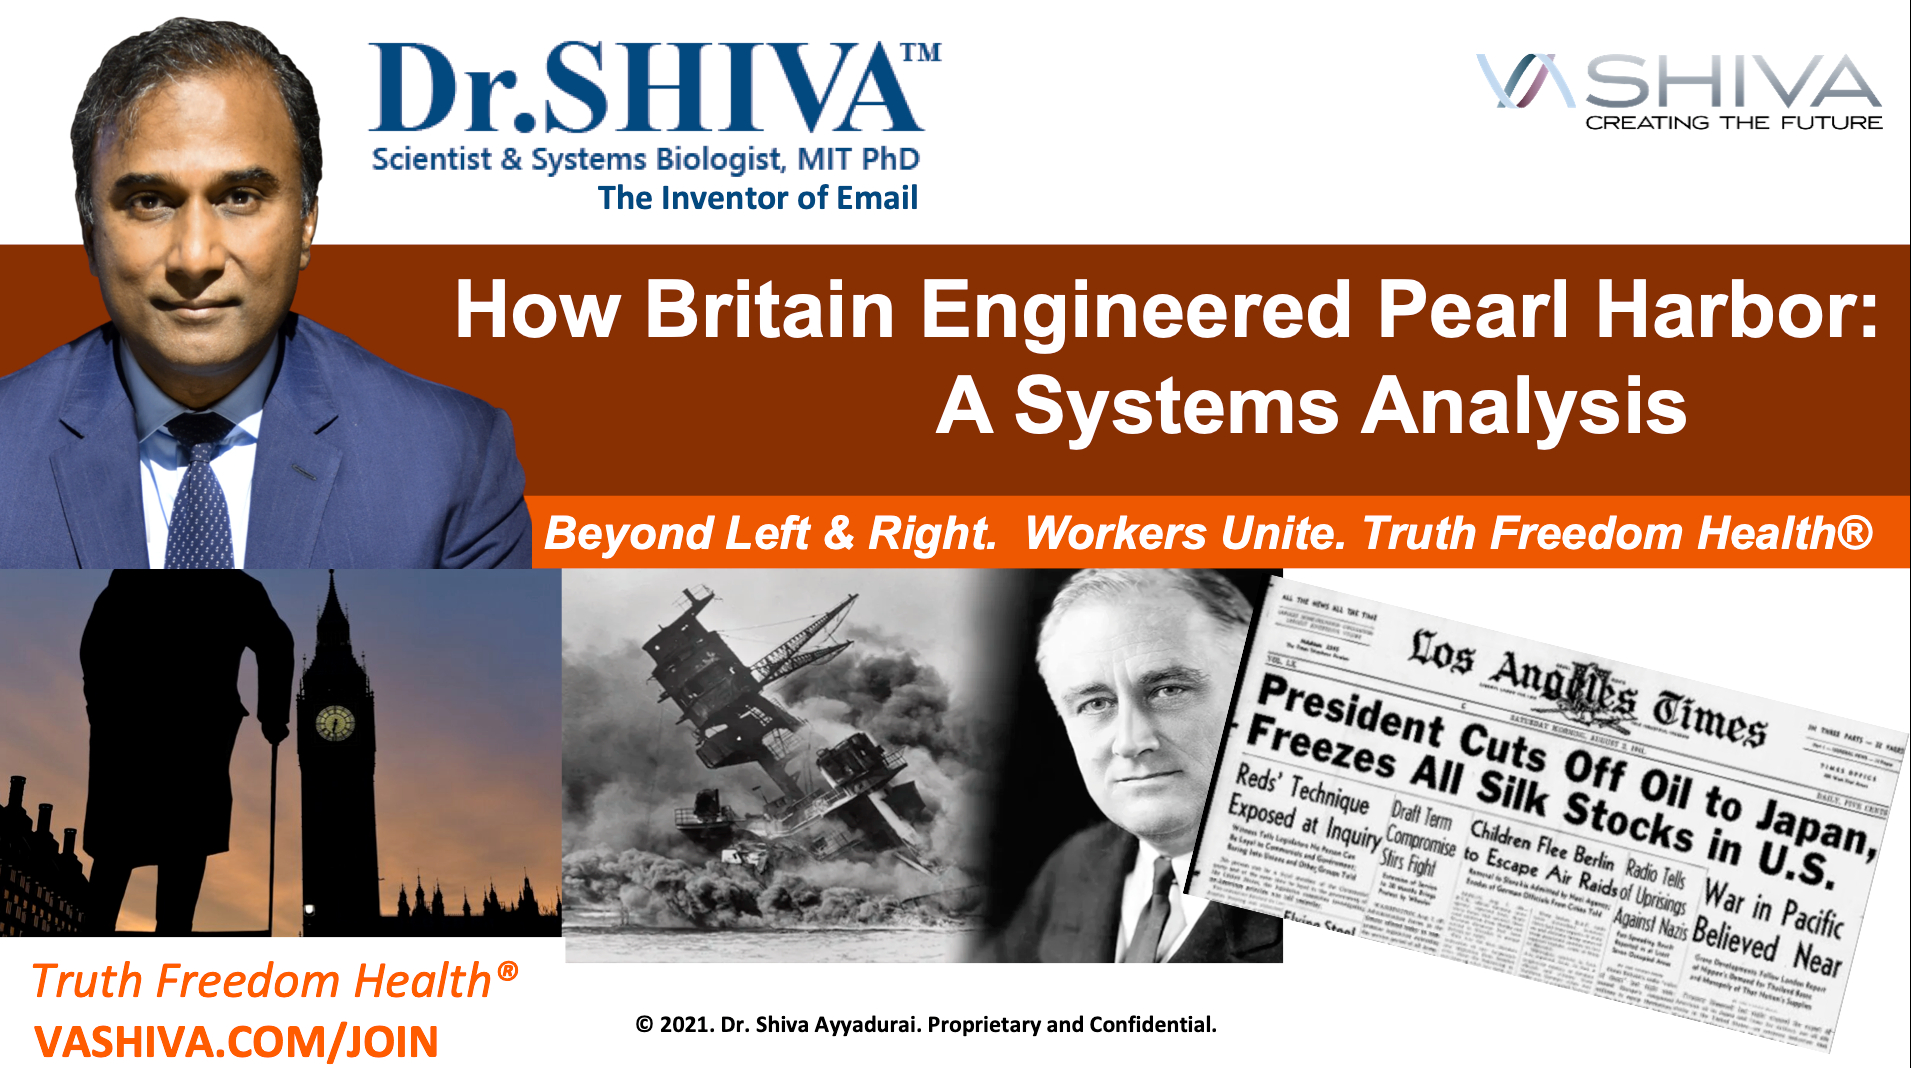 Dr.SHIVA LIVE: How Britain Engineered Pearl Harbor - A Historical Systems Analysis